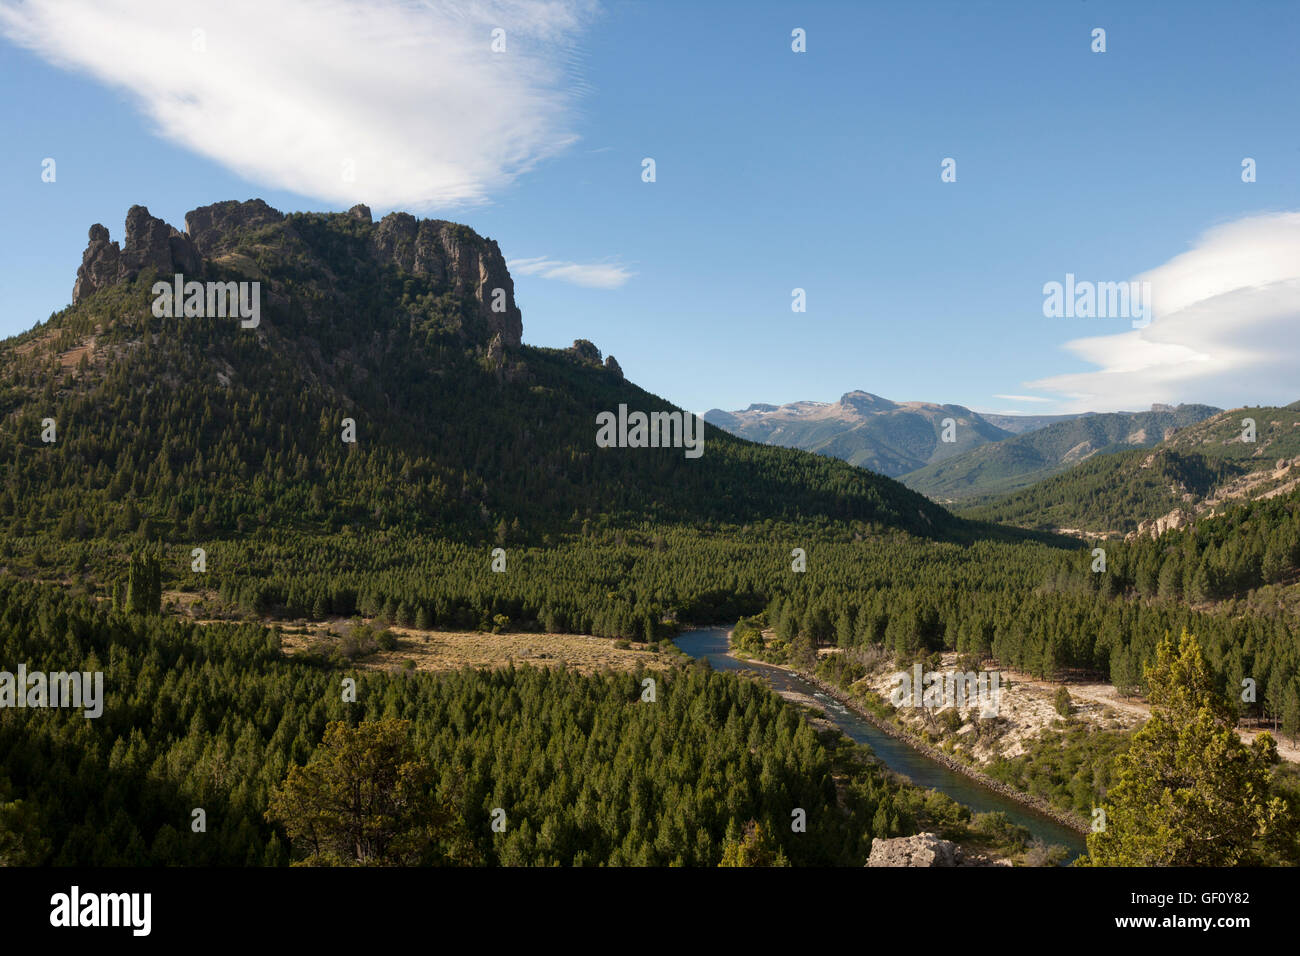 Landscape in the province of Neuquen, Argentina Stock Photo